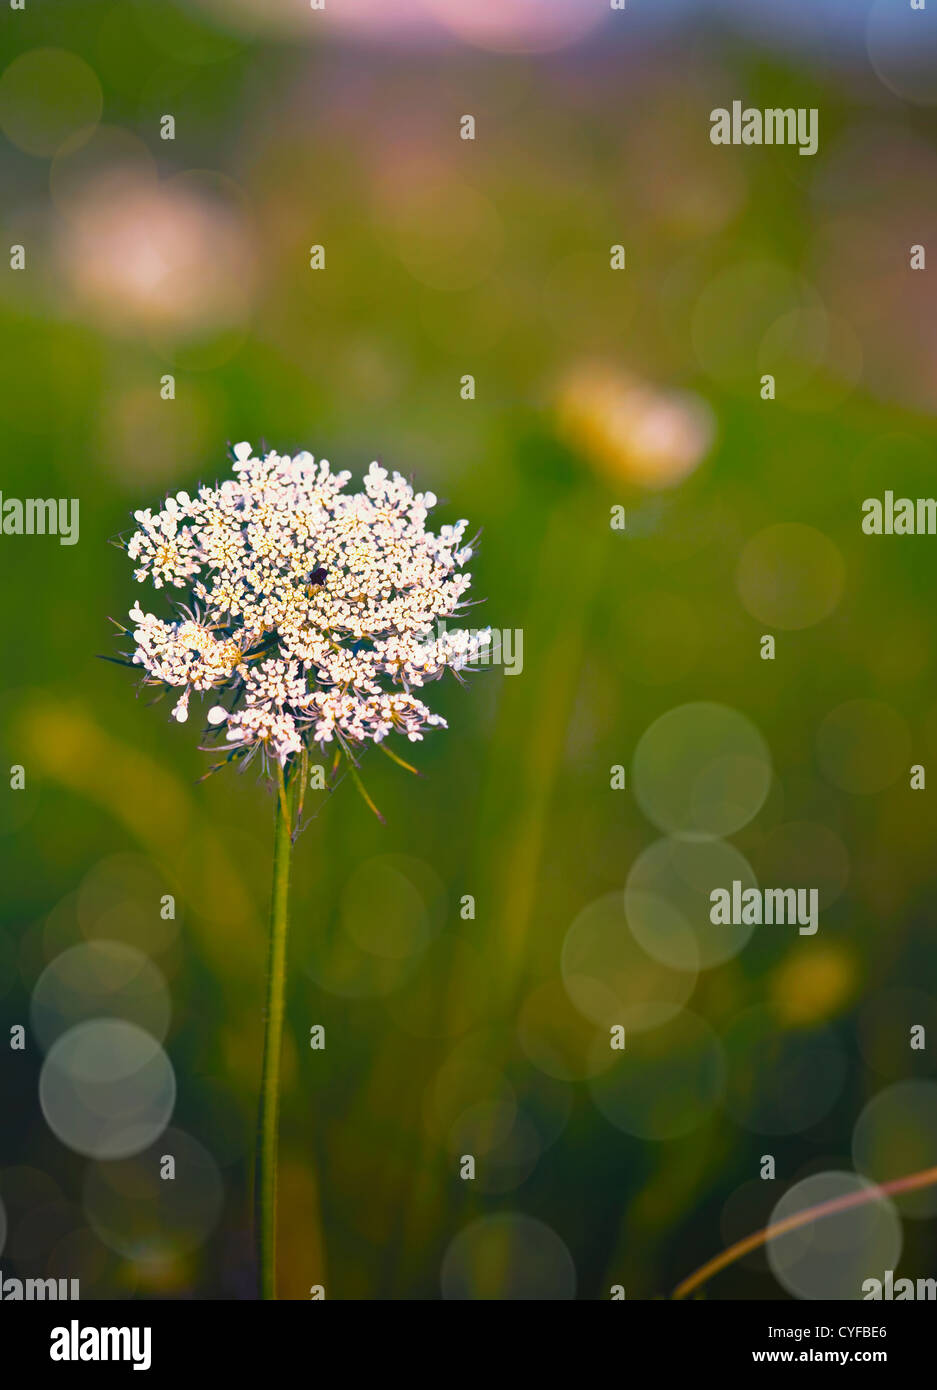 Queen Anne's Lace, a wild flower of the carrot family, growing in an open field. Stock Photo